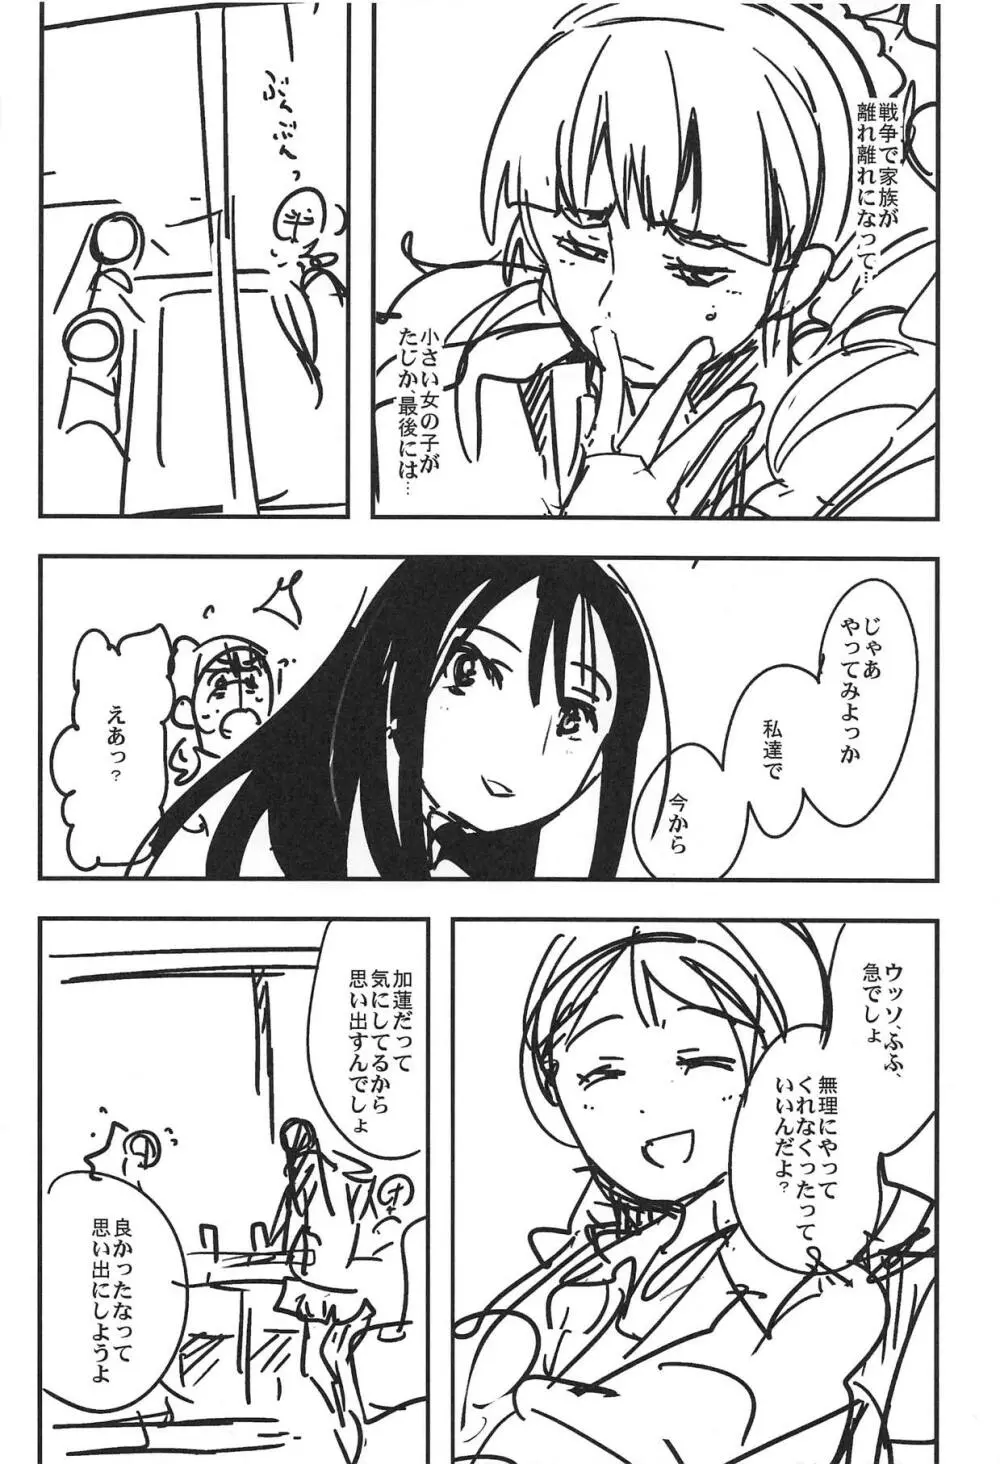 ALL TIME CINDERELLA 神谷奈緒 - page37